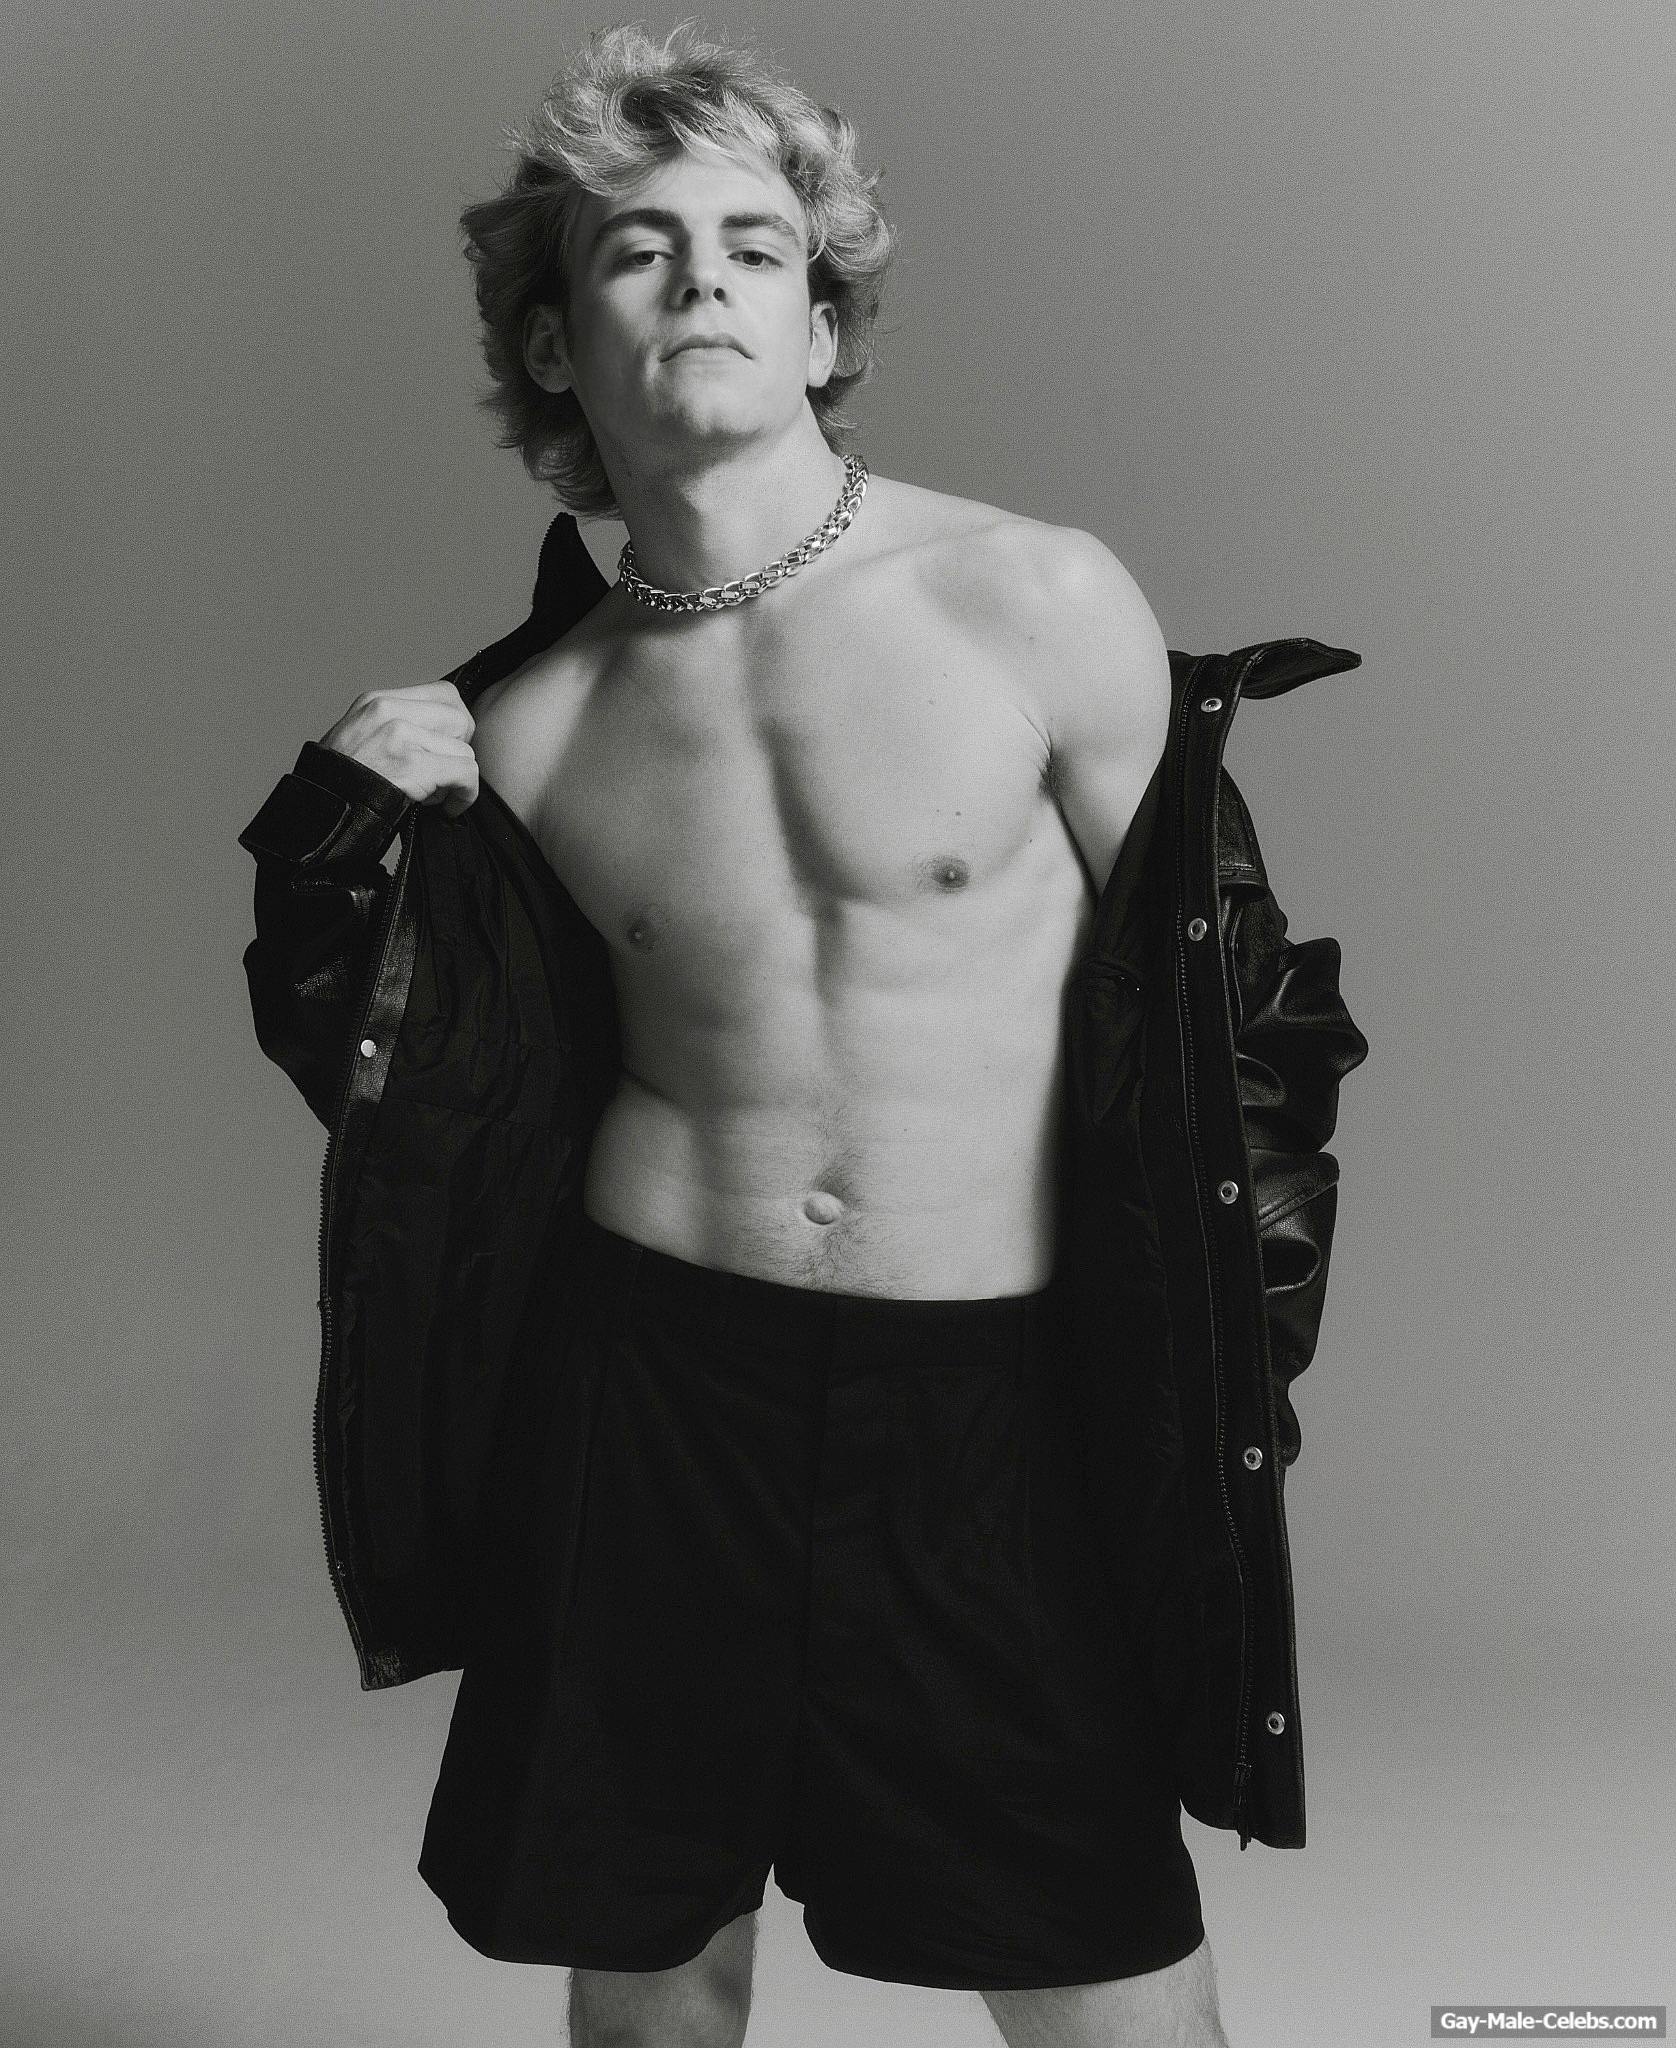 Ross Lynch Shirtless And Sexy Photo-shoot